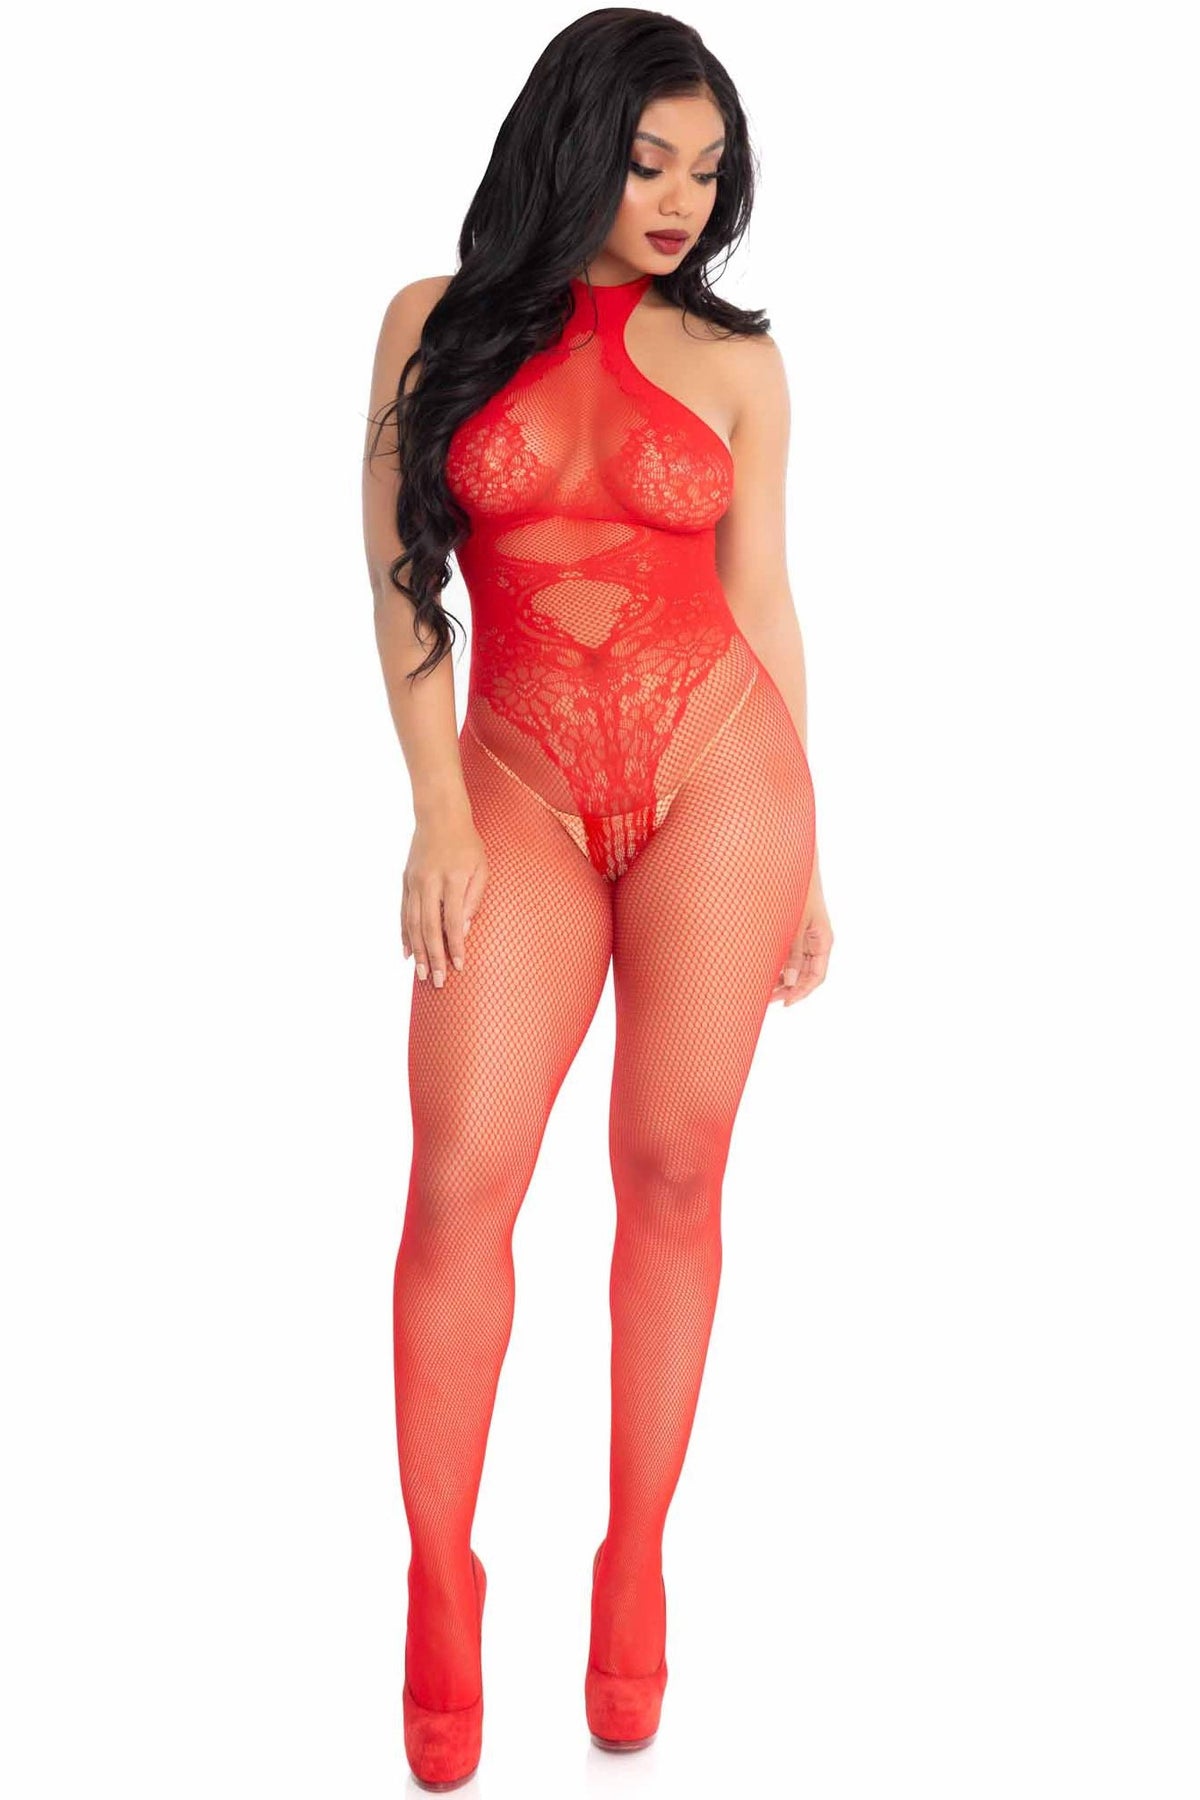 Floral Lace Hourglass Bodystocking